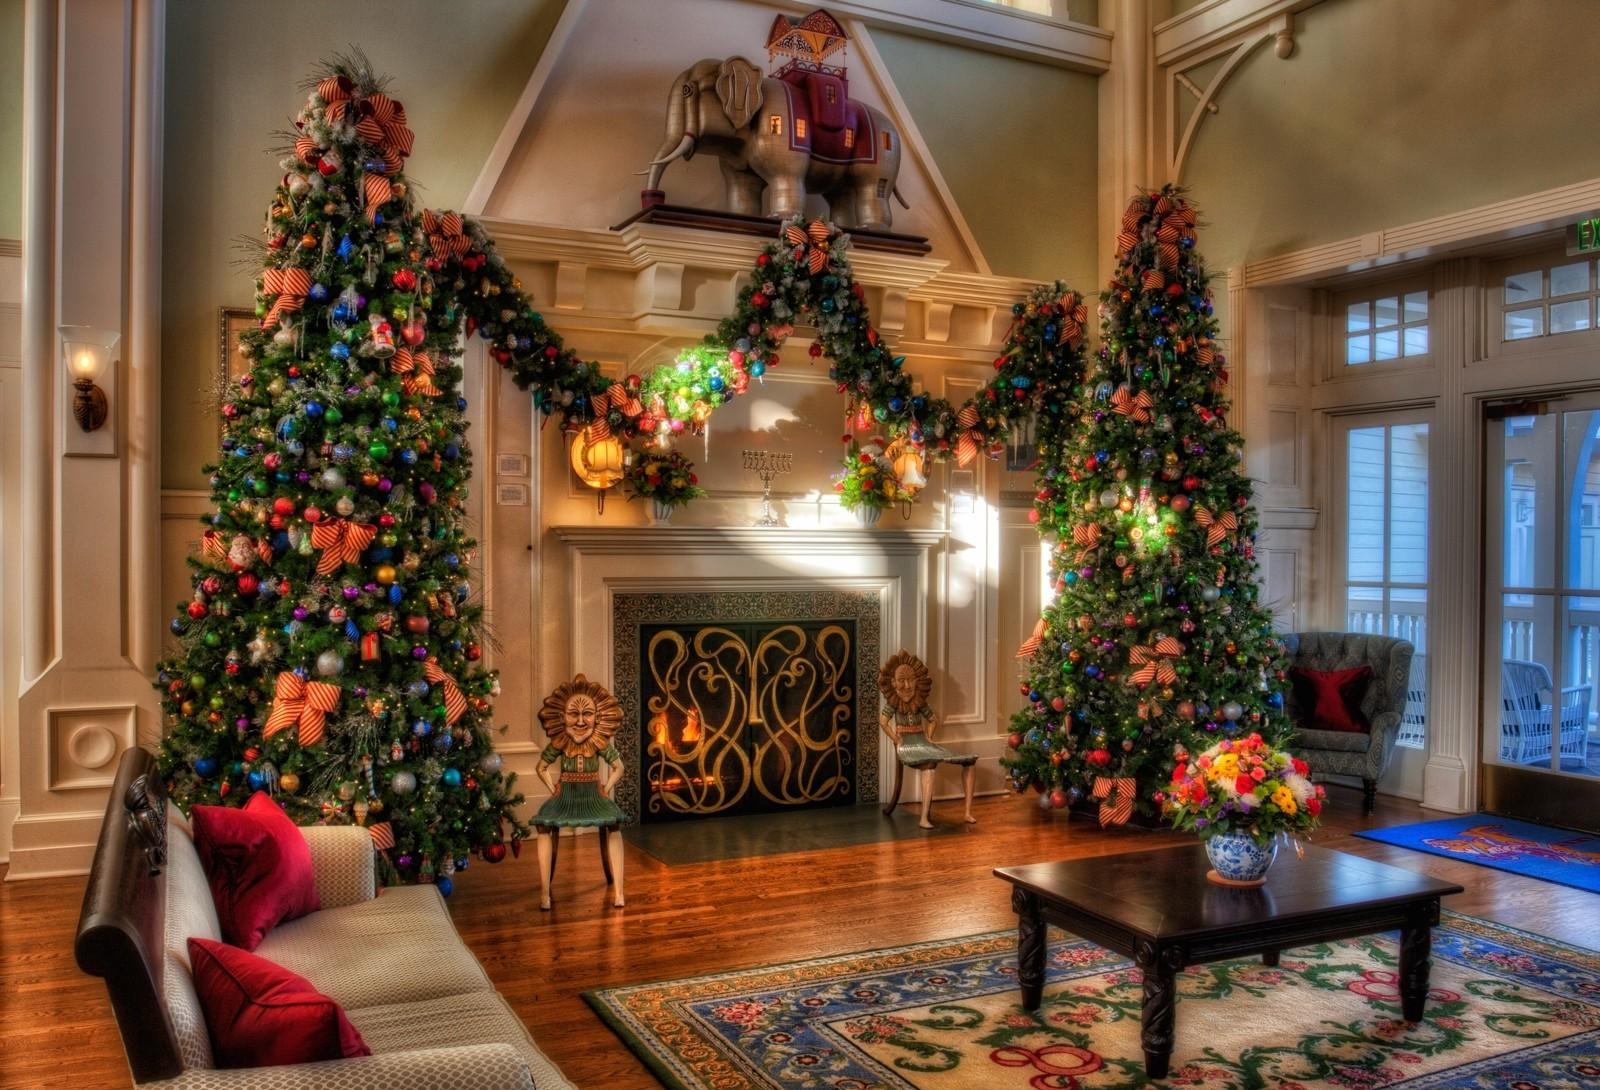 holidays, coziness, decorations, interior, holiday, house, comfort, fireplace, christmas trees iphone wallpaper